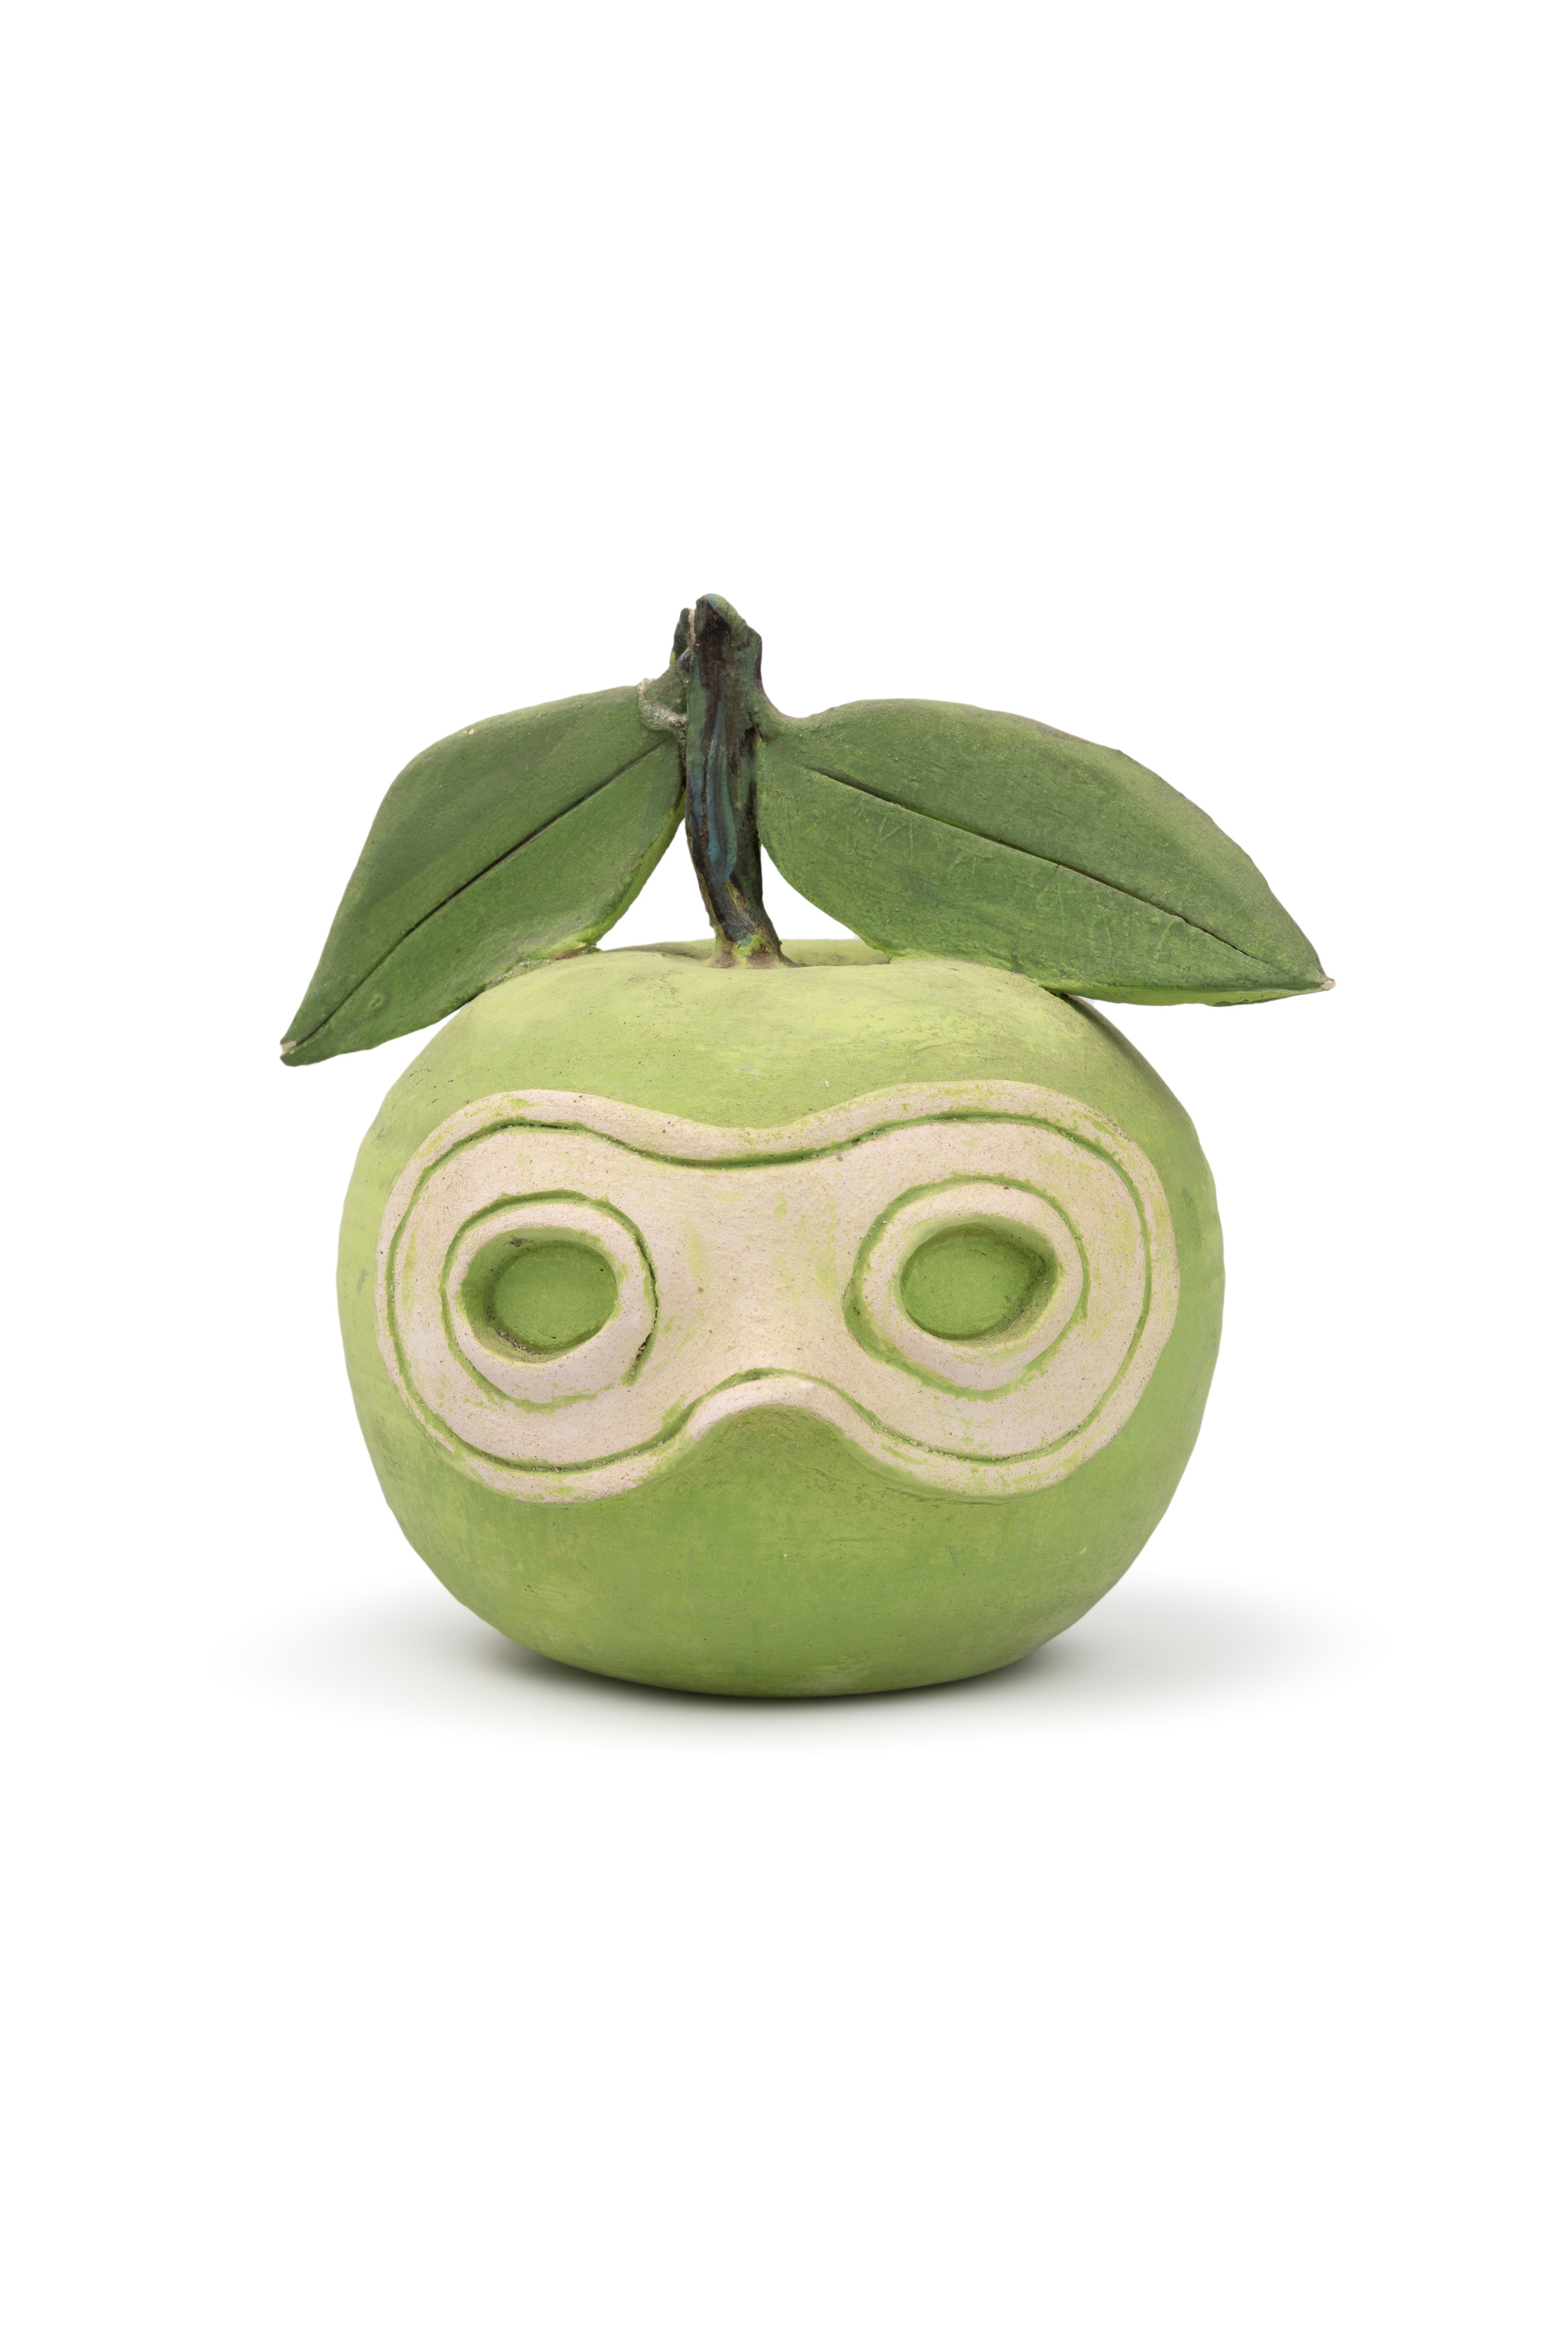 'Masked apple' sculpture from George and Joyce Gittoes Yellow House Puppet Theatre collection